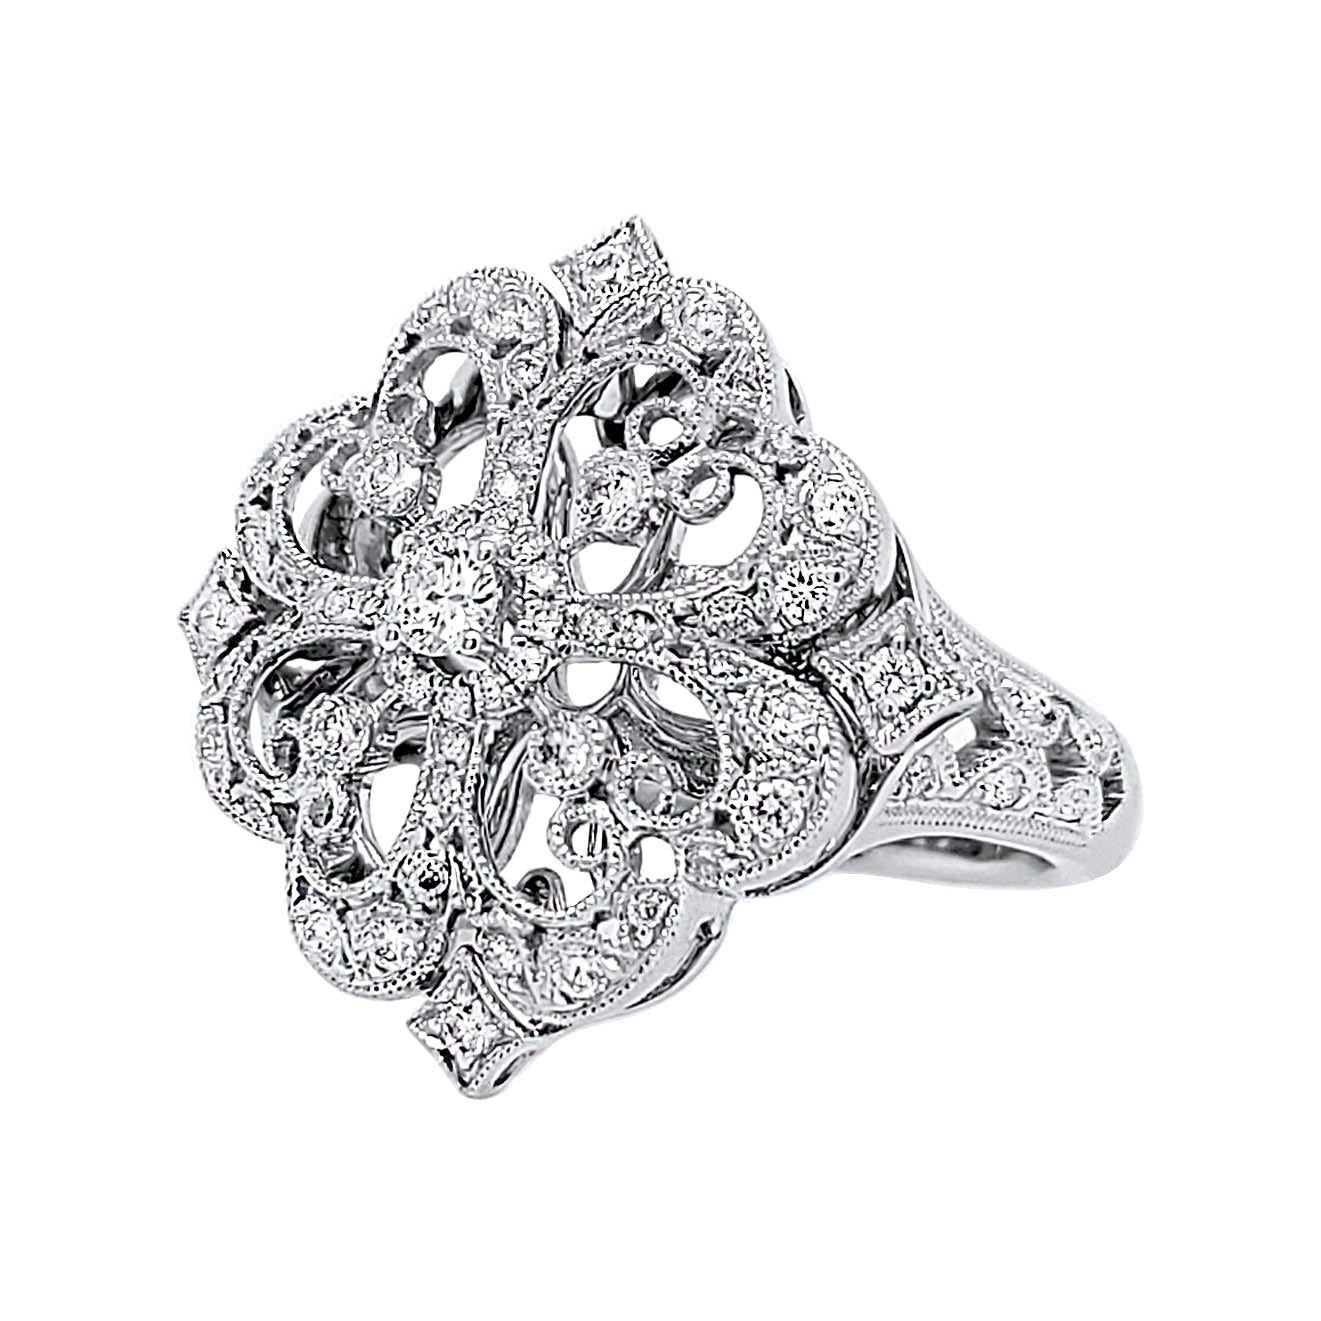 Produced by award winning Italian designer Stefano Vitolo. Stefano creates custom artisanal one of a kind jewelry with excellent gemstones in a truly old world Italian craftmanship.
This handcrafted ring has 0.63 total carat weight of F/G color, and